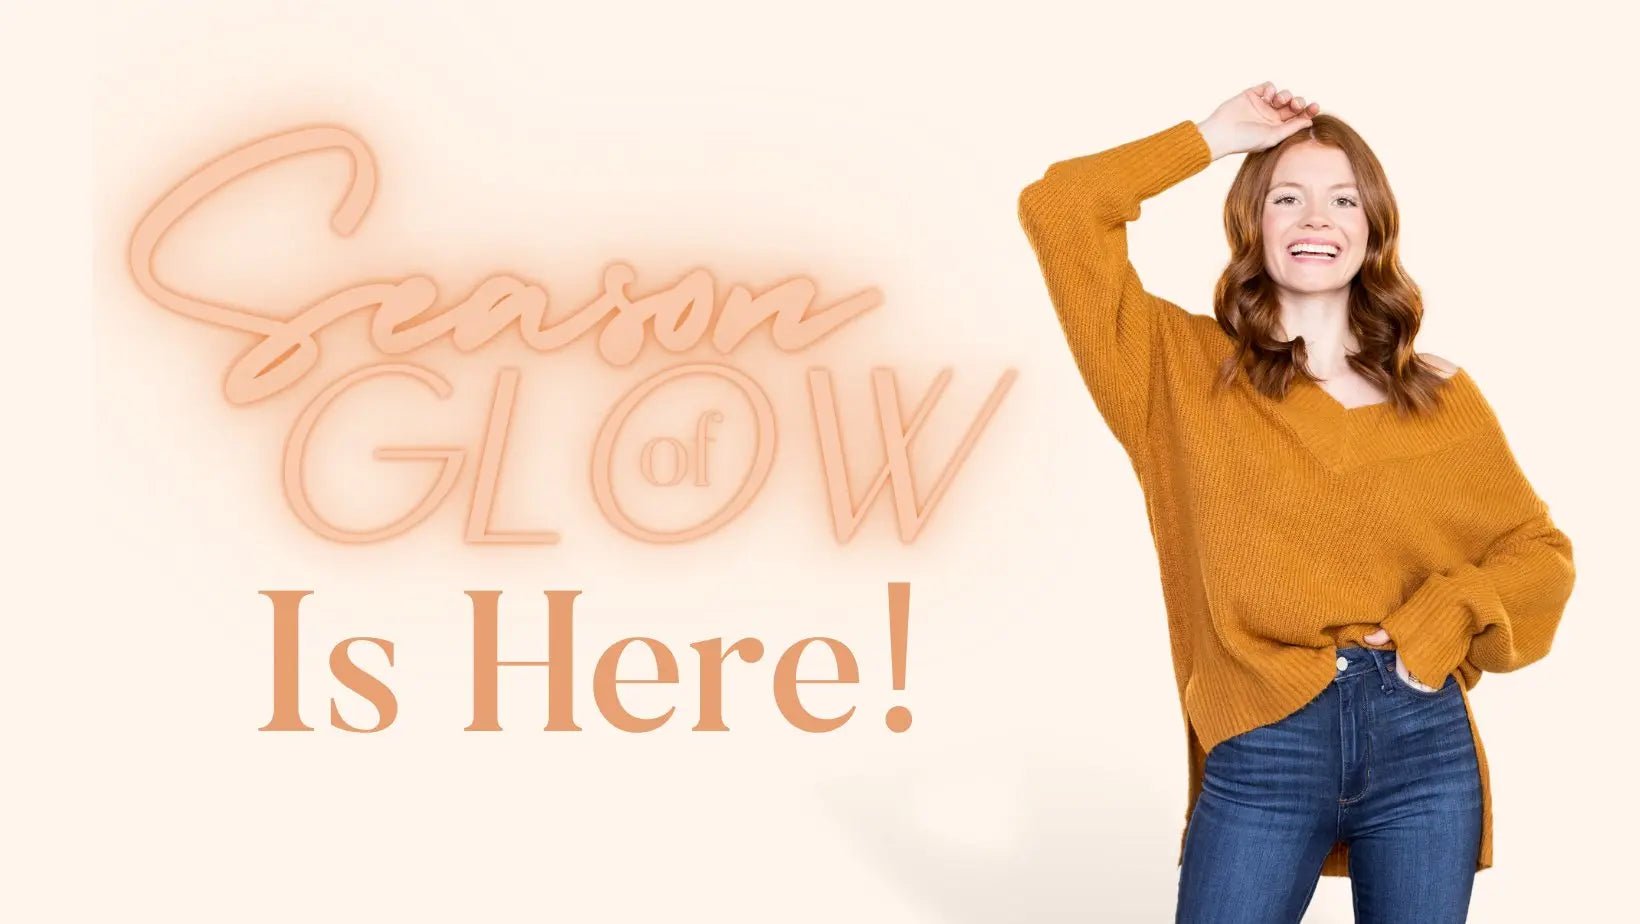 Introducing our "Season of Glow" Collection - JO+CO